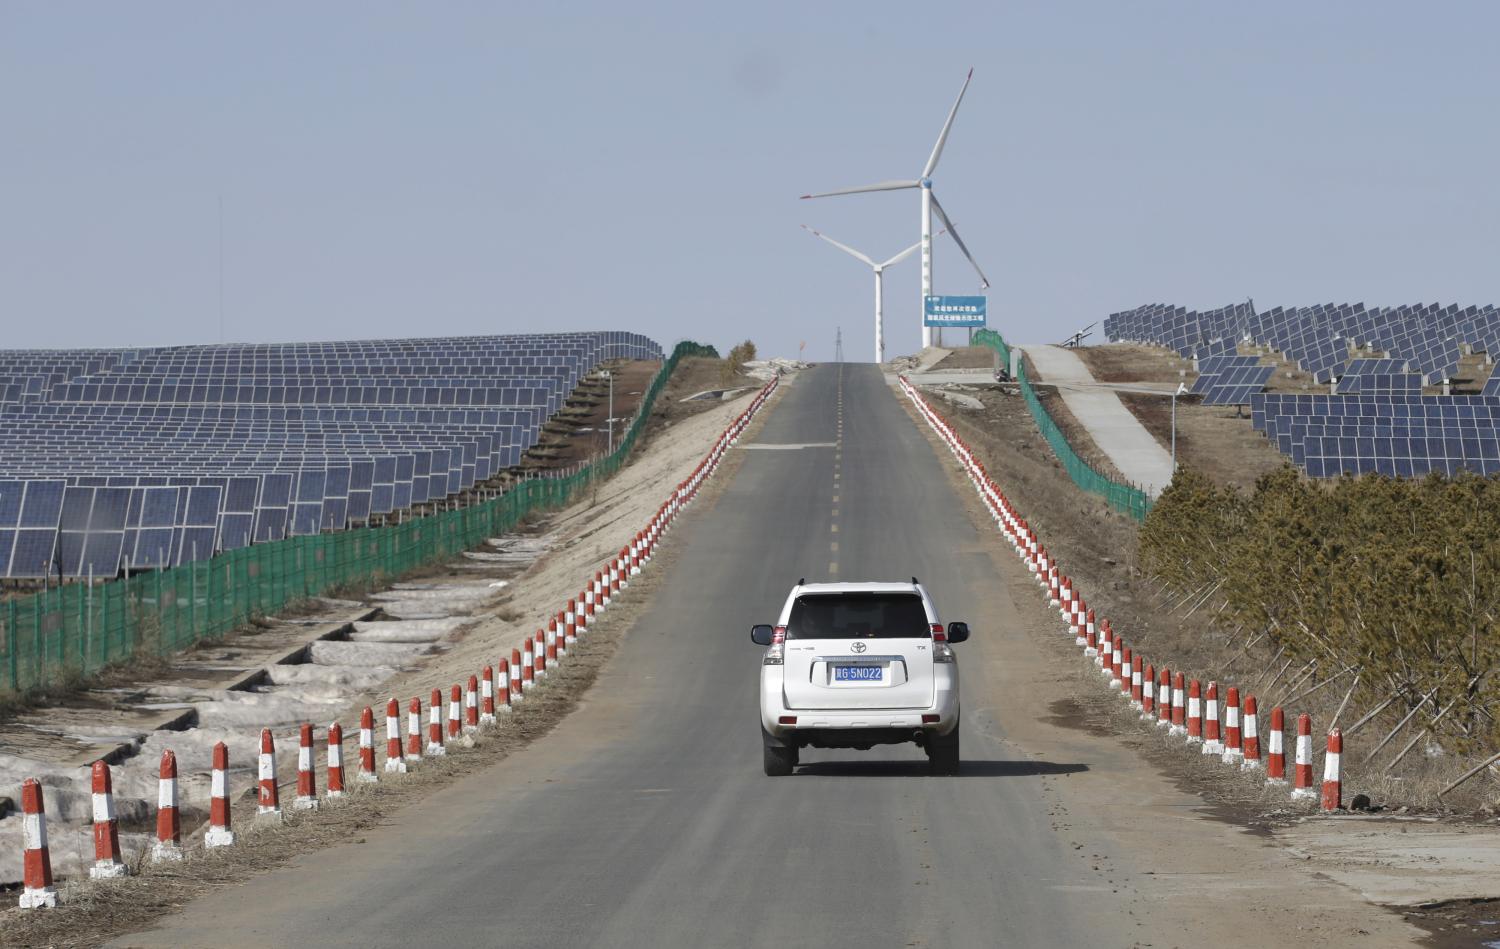 A vehicle drives past the solar panels near wind turbines at a wind and solar energy storage and transmission power station in Zhangjiakou